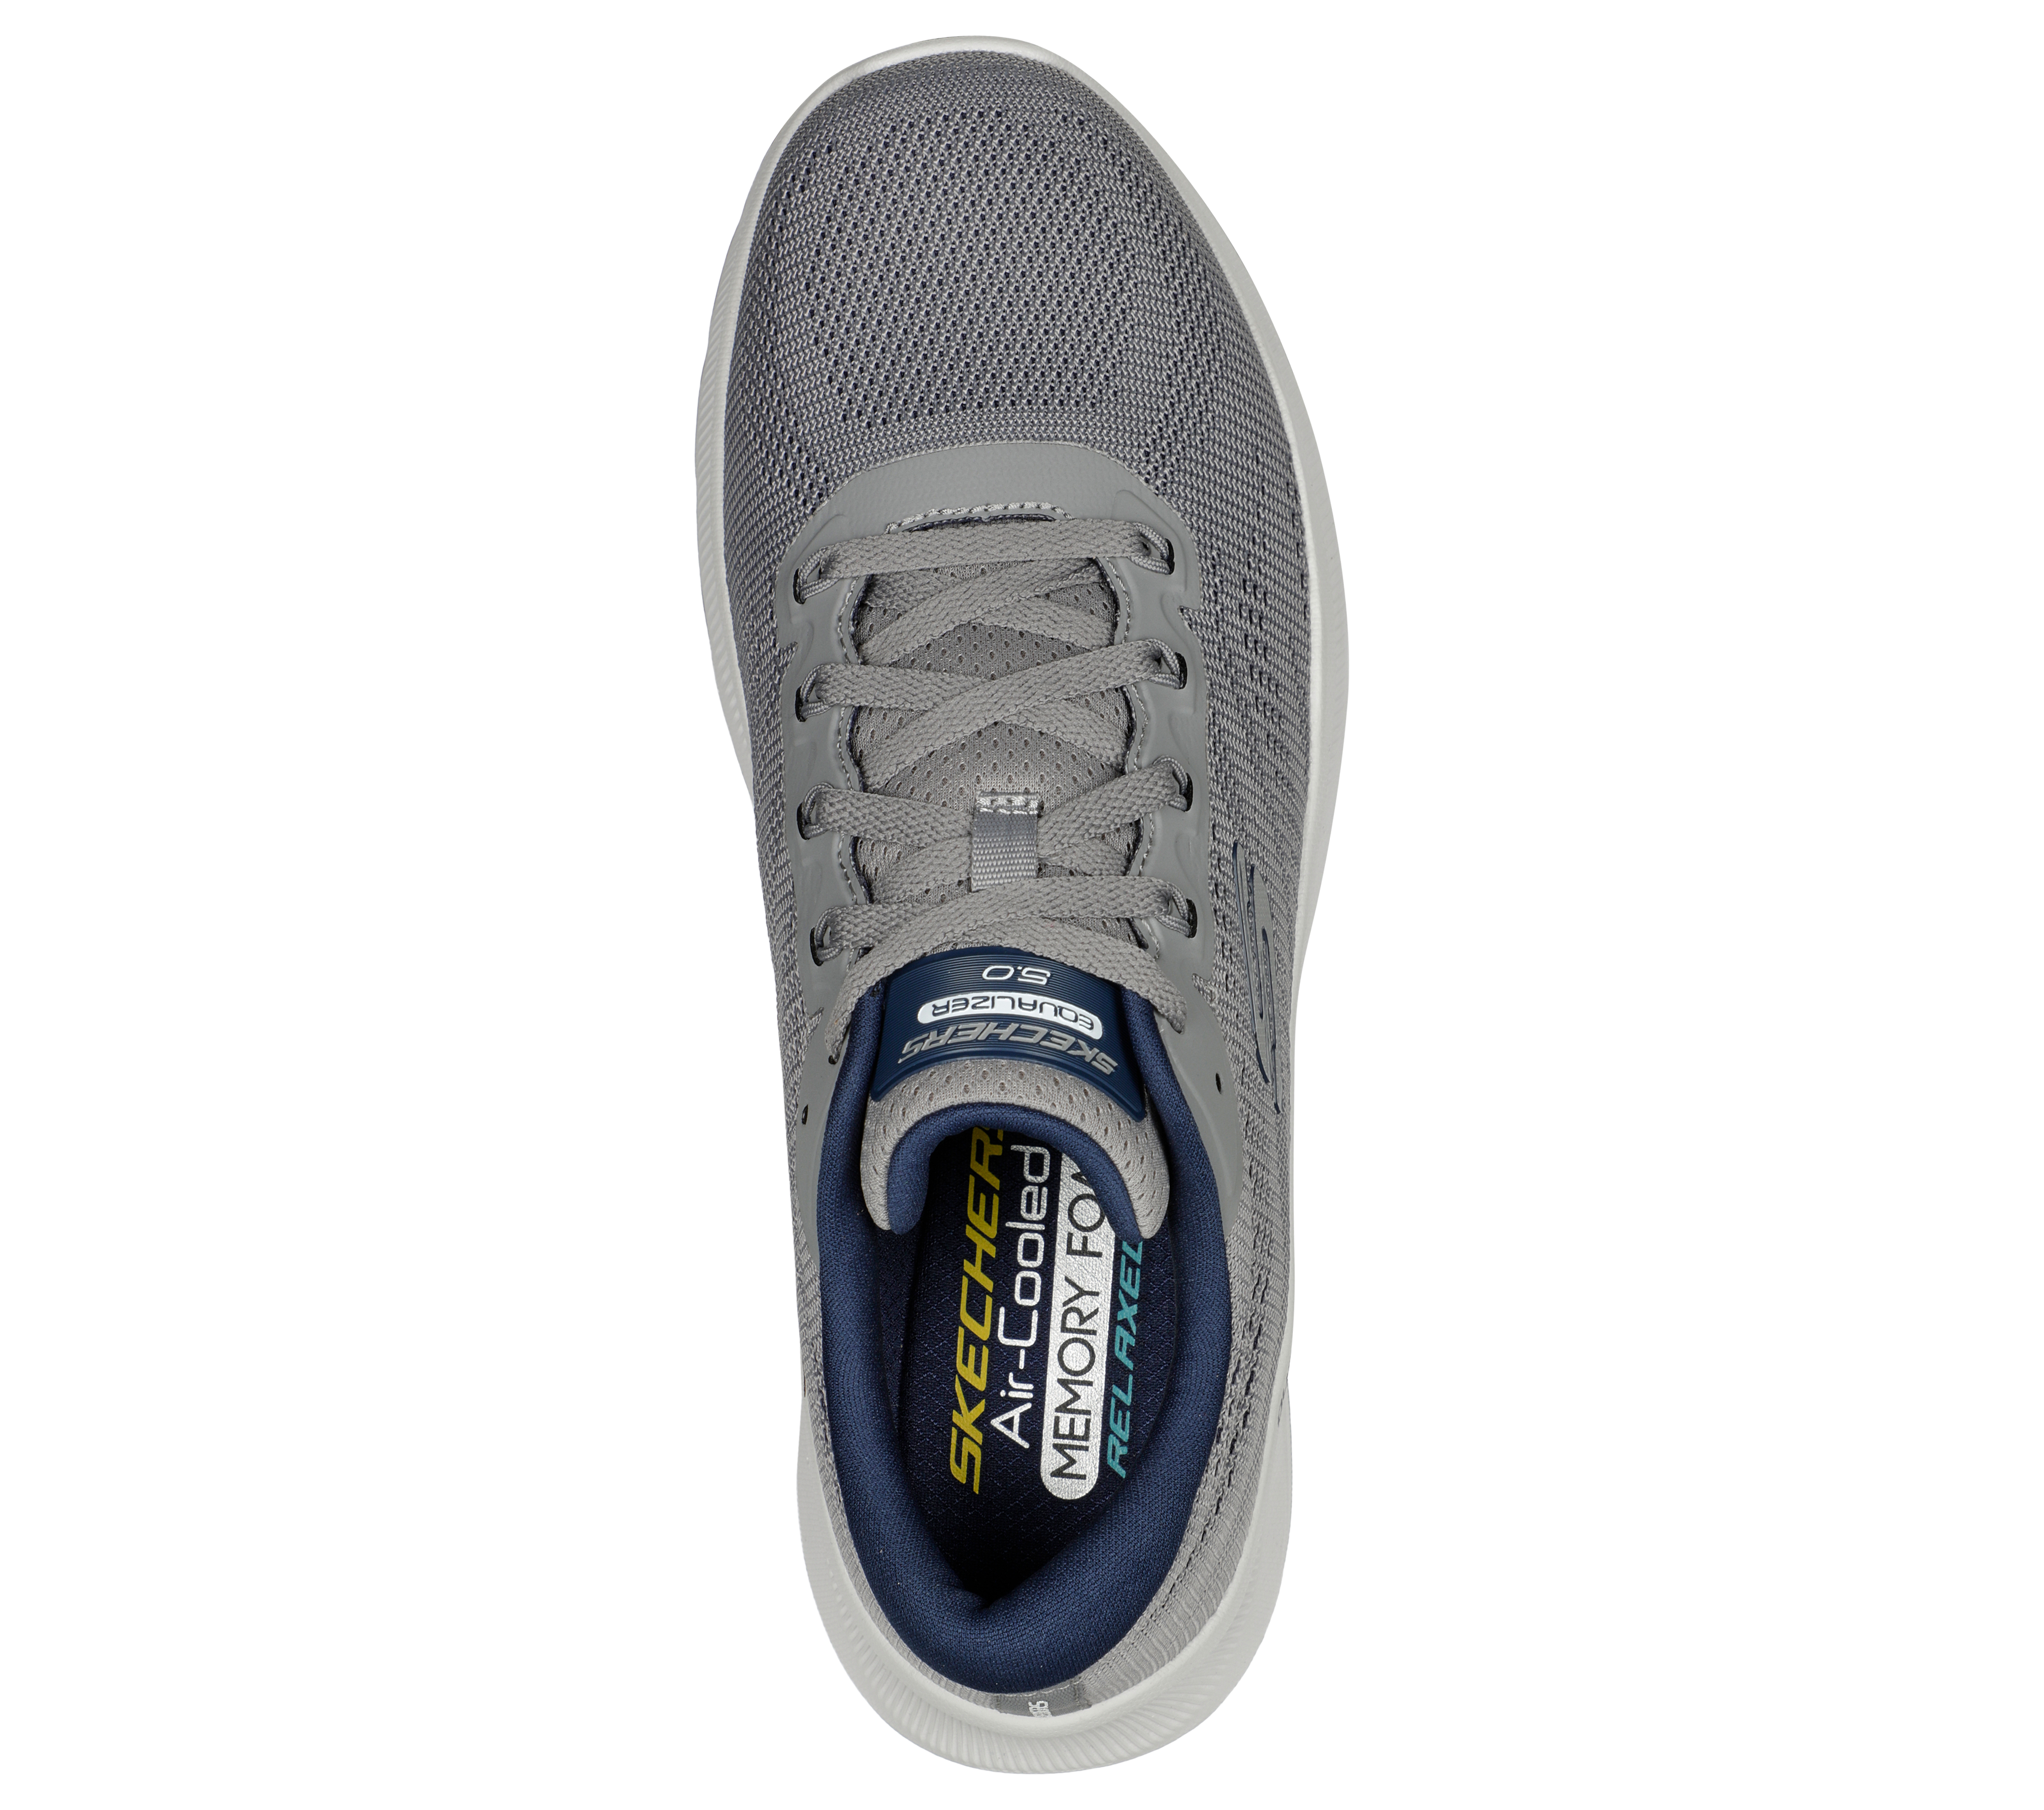 Relaxed Equalizer 5.0 - New Interval | SKECHERS